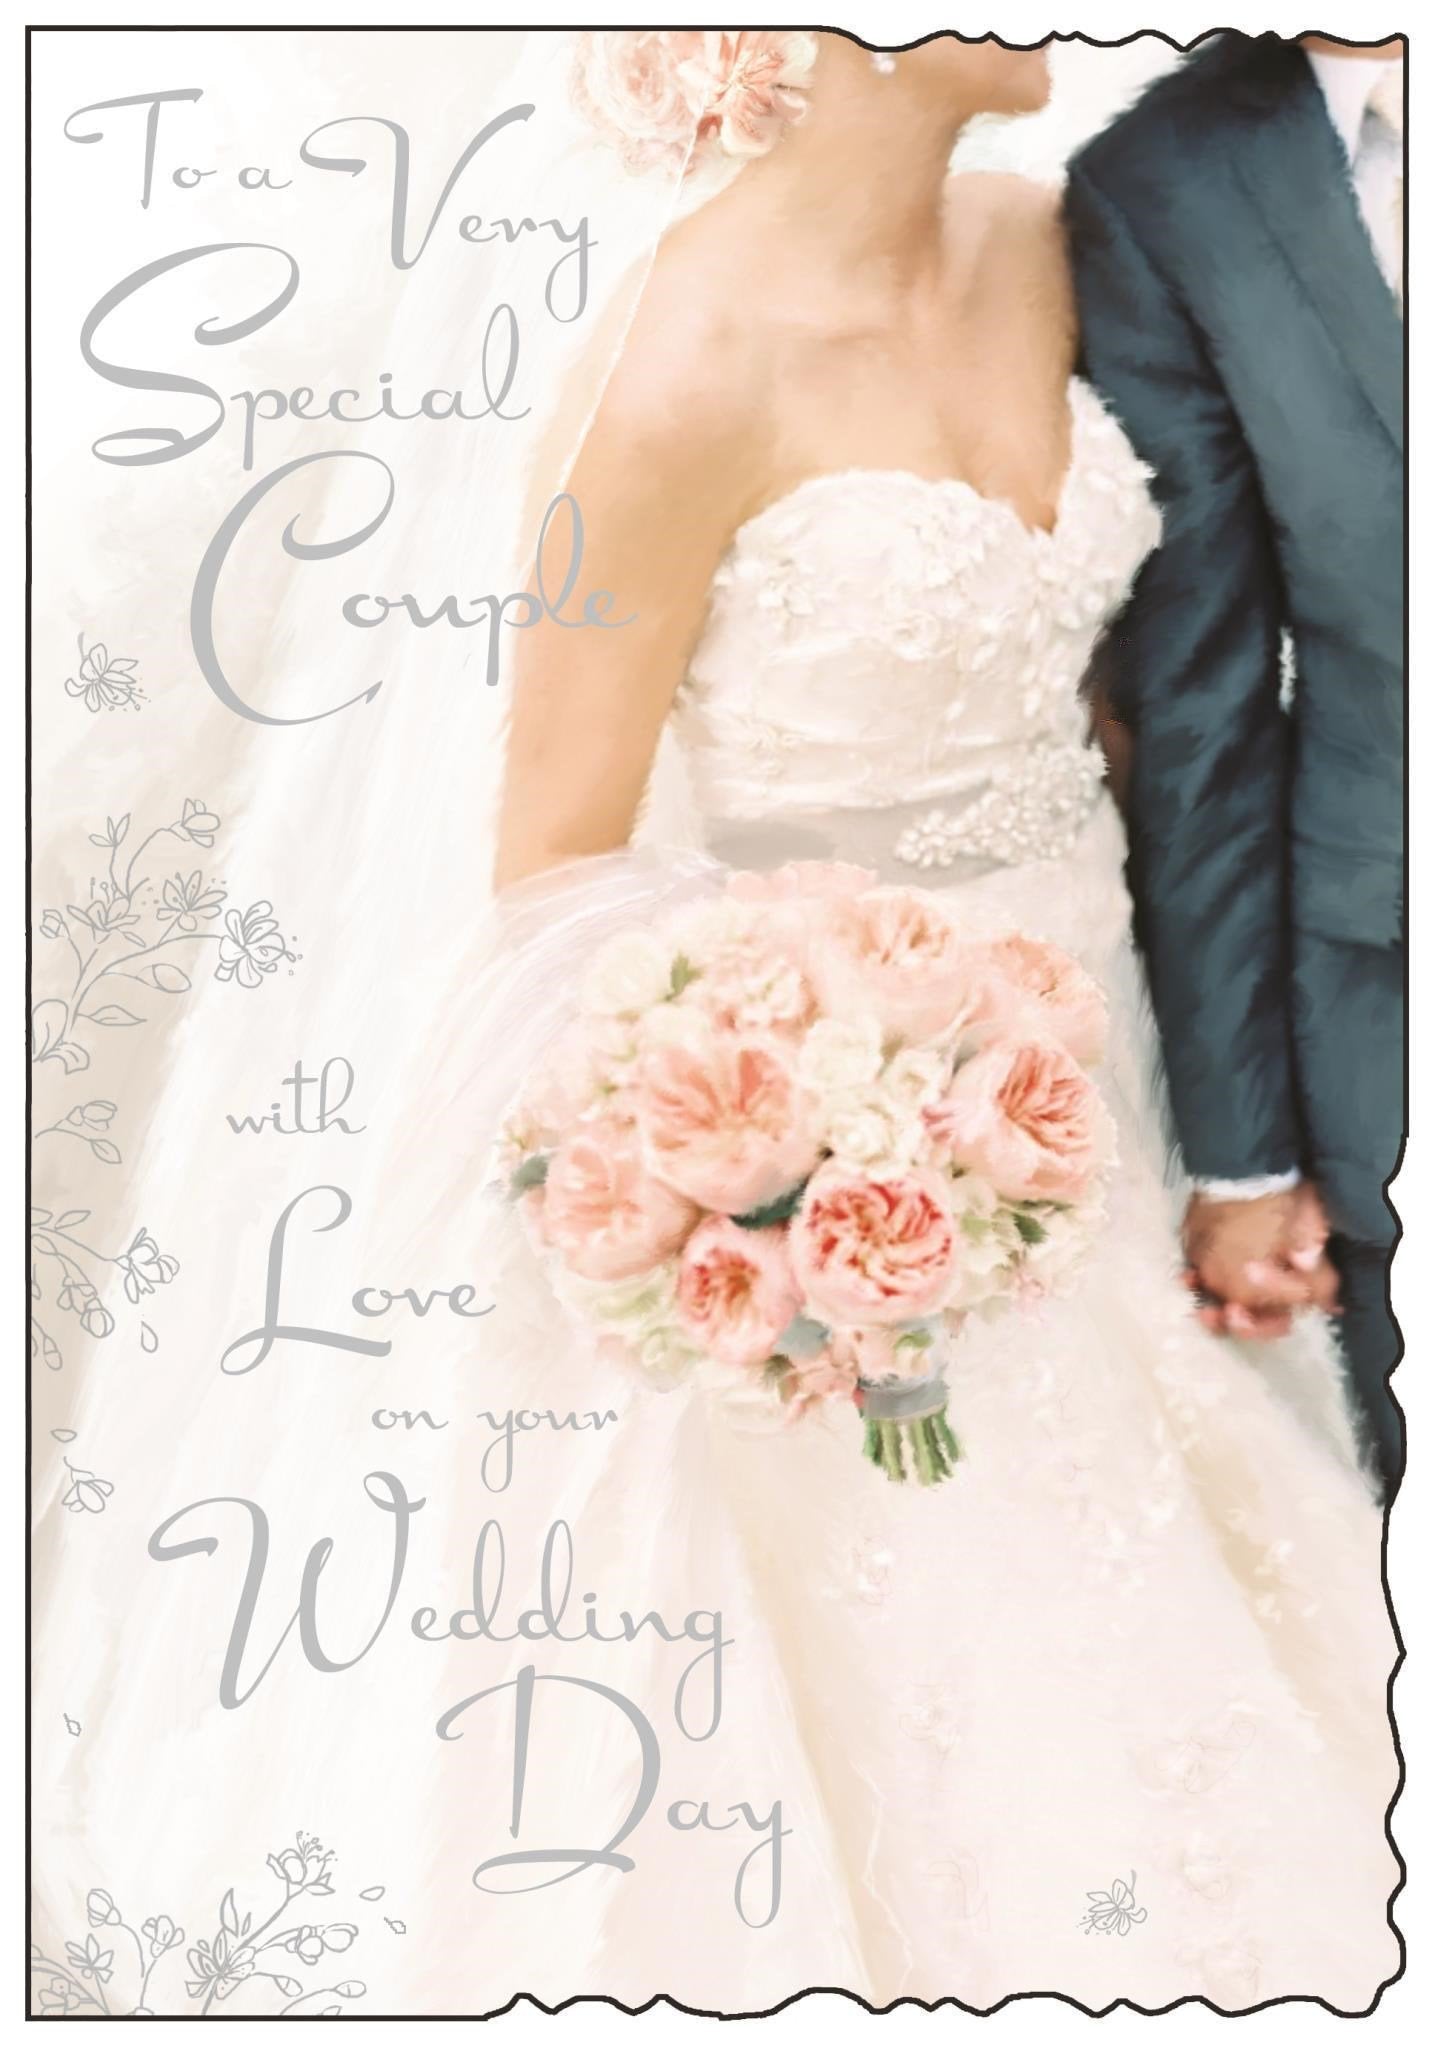 Front of Special Couple Wedding Day Greetings Card